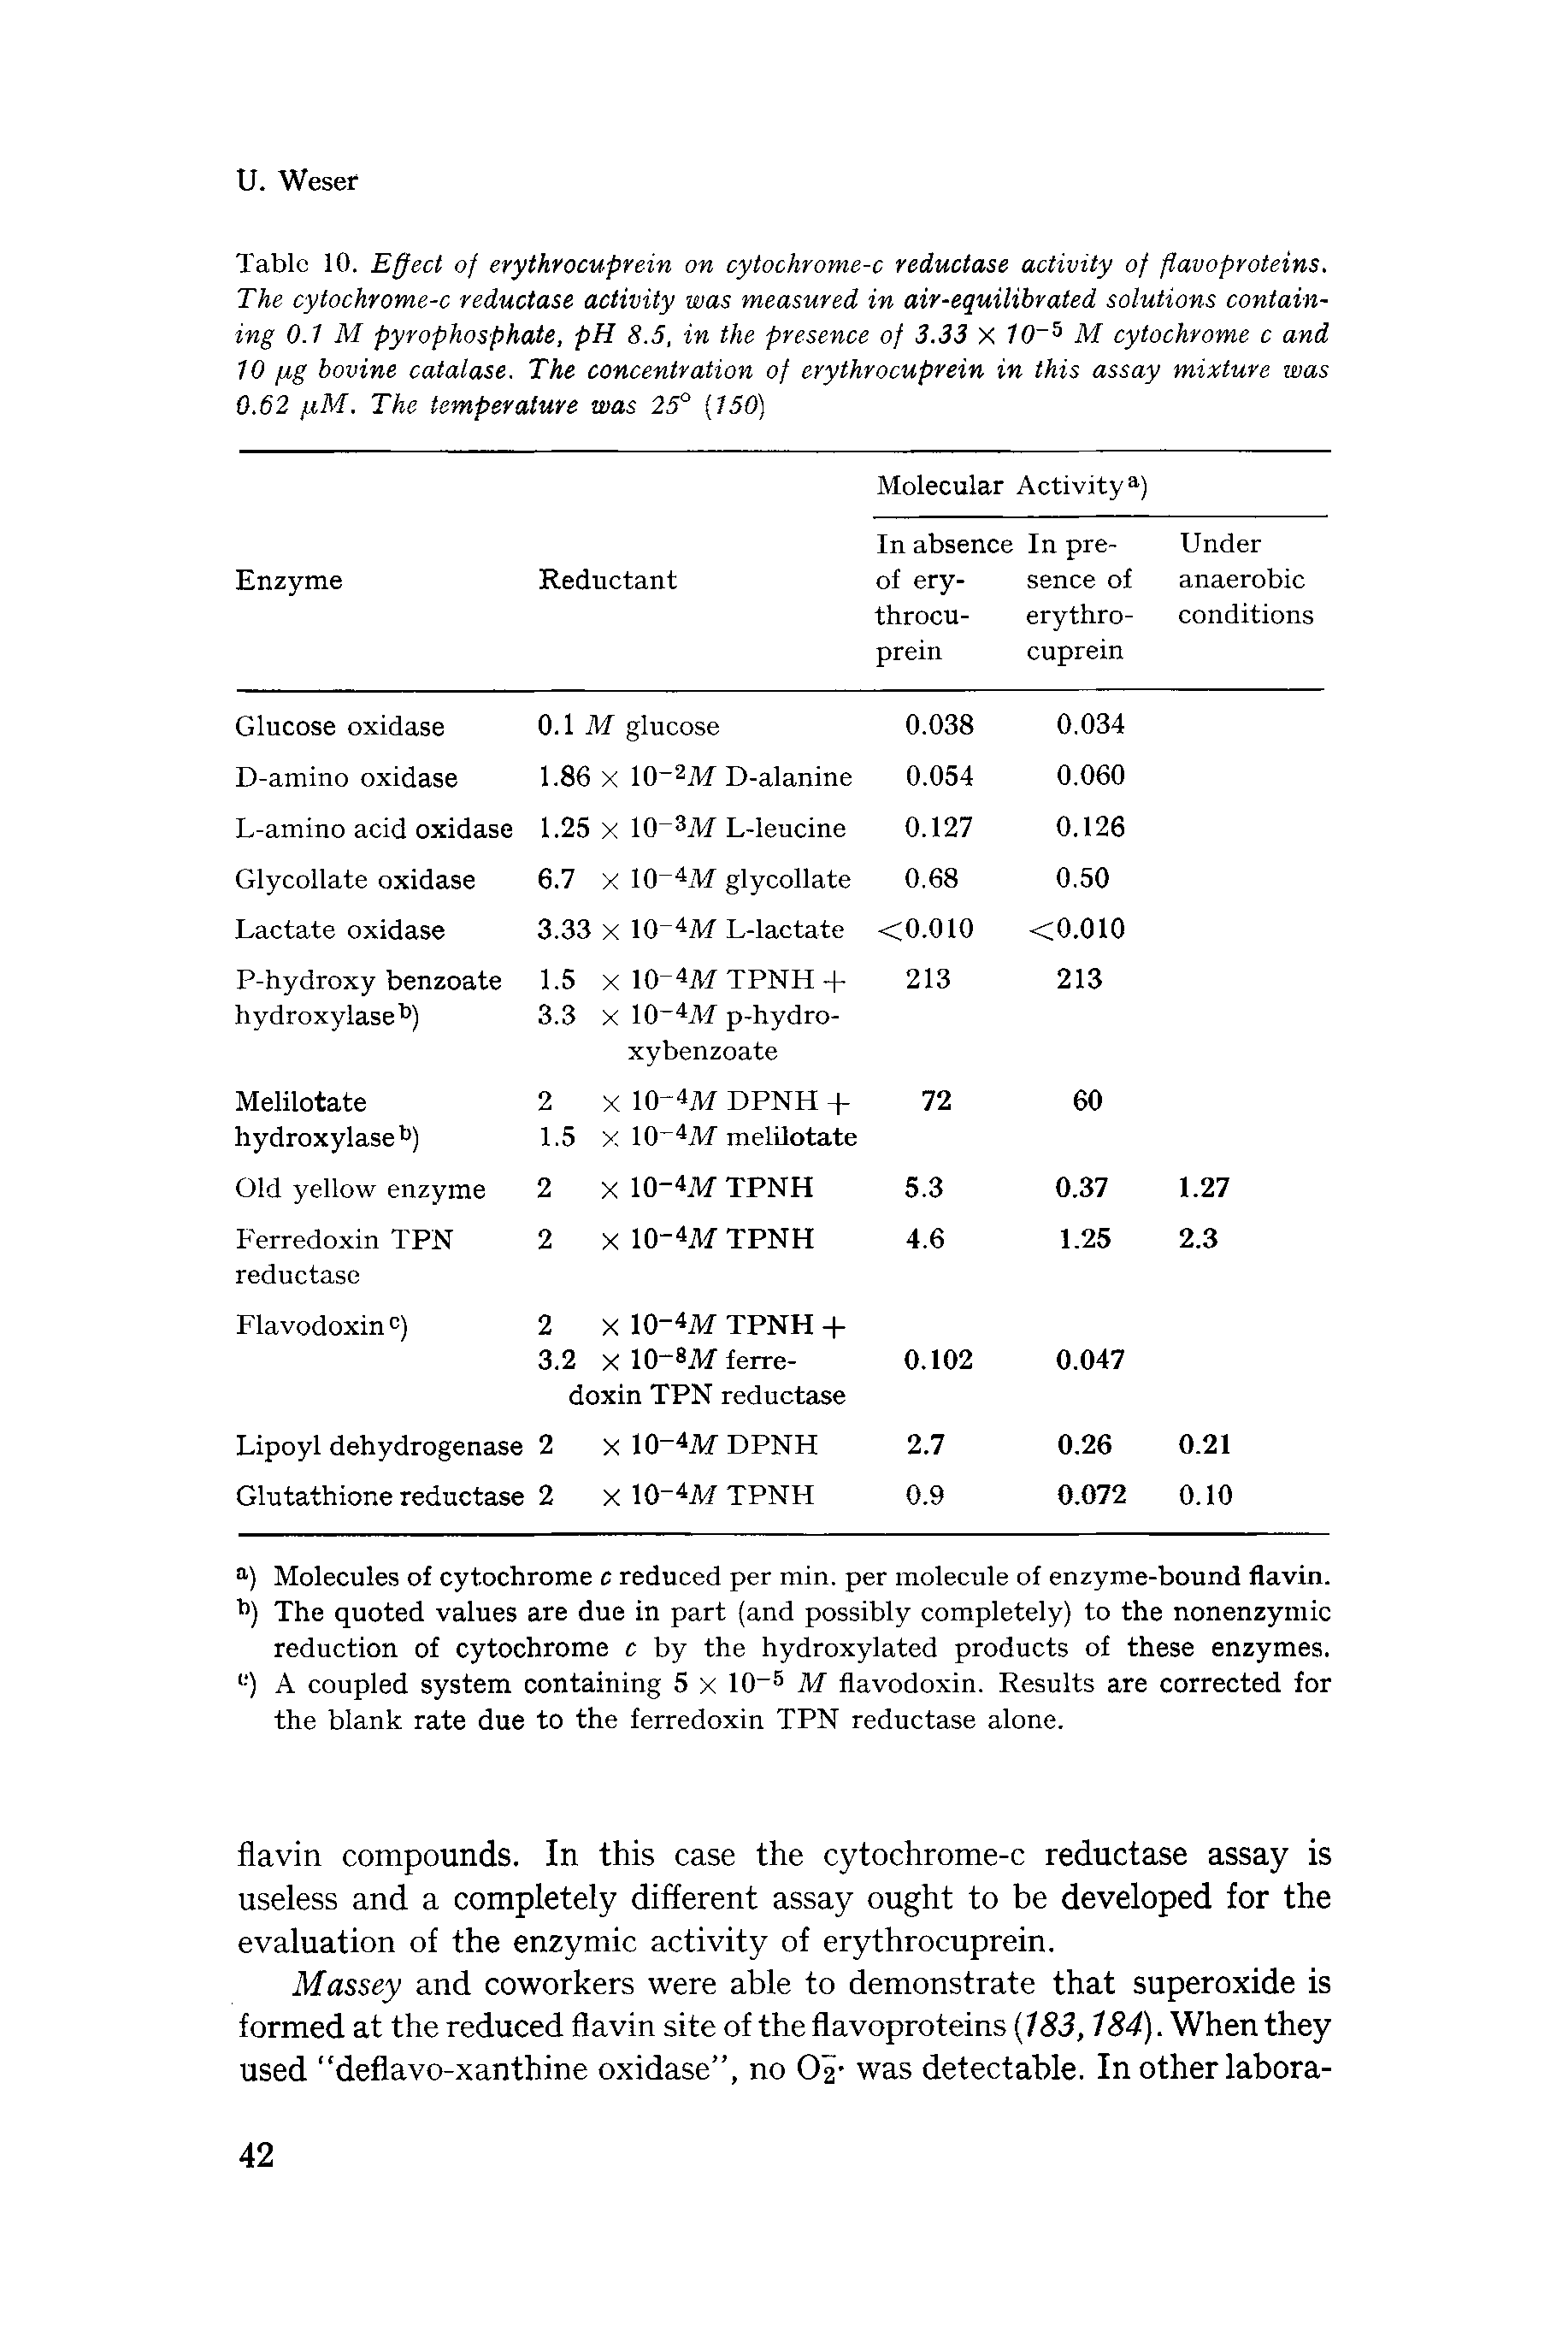 Table 10. Effect of erythrocuprein on cytochrome-c reductase activity of flavoproteins. The cytochrome-c reductase activity was measured in air-equilibrated solutions containing 0.1 M pyrophosphate, pH 8.5, in the presence of 3.33 X 70-5 M cytochrome c and 10 fig bovine catalase. The concentration of erythrocuprein in this assay mixture was 0.62 fiM. The temperature was 25° (150)...